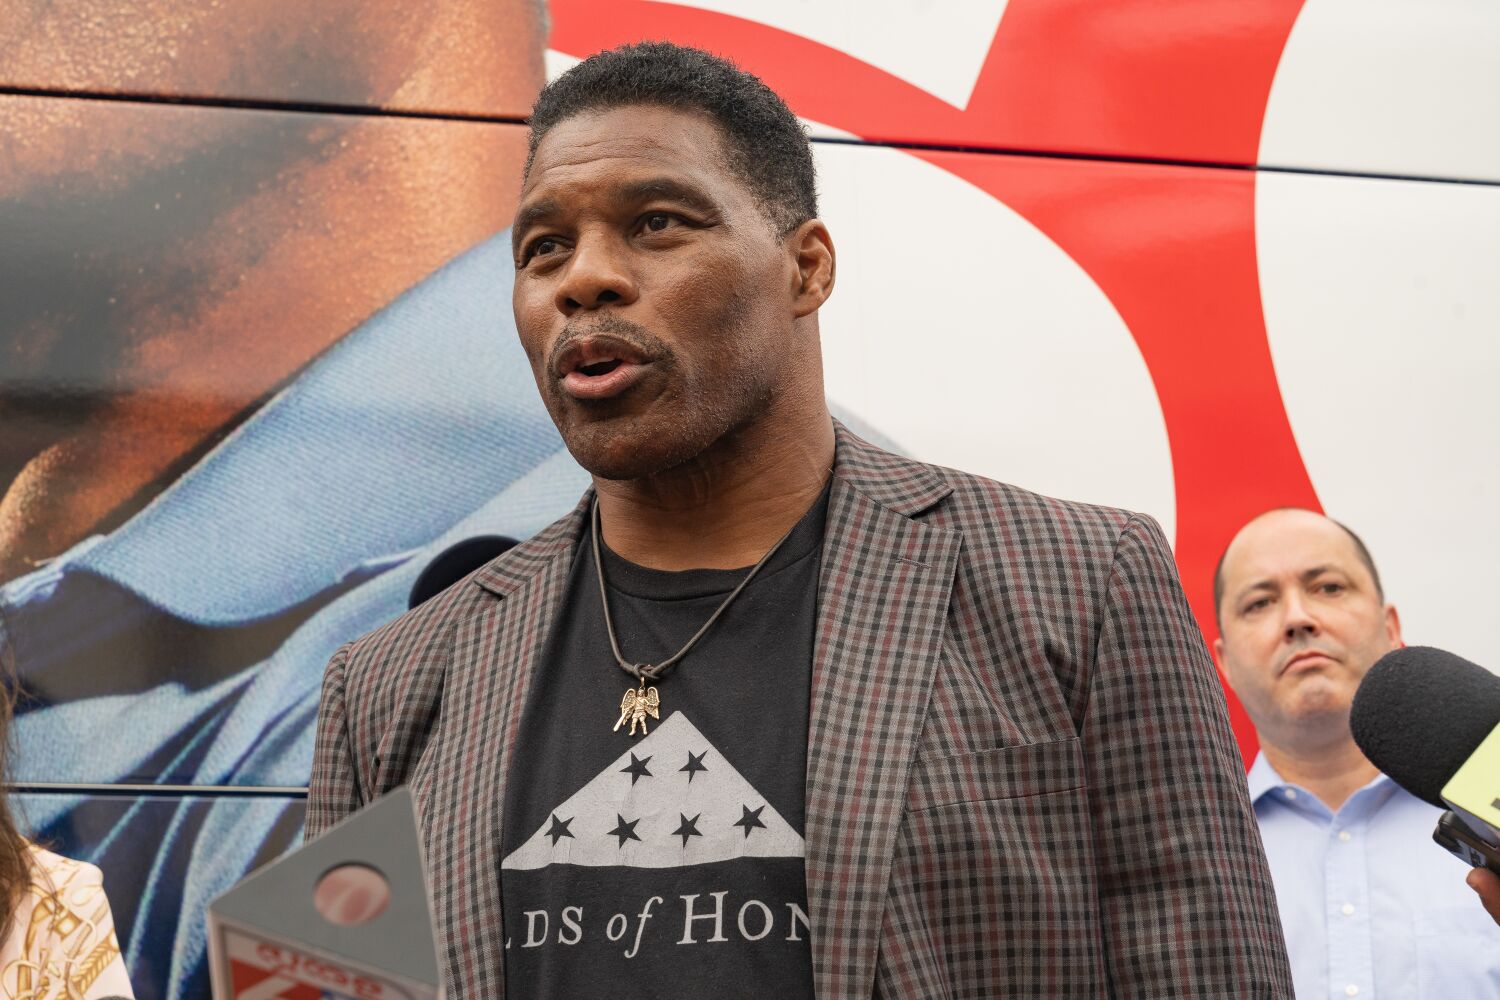 Herschel Walker and Raphael Warnock head to runoff in Georgia Senate election rife with controversy